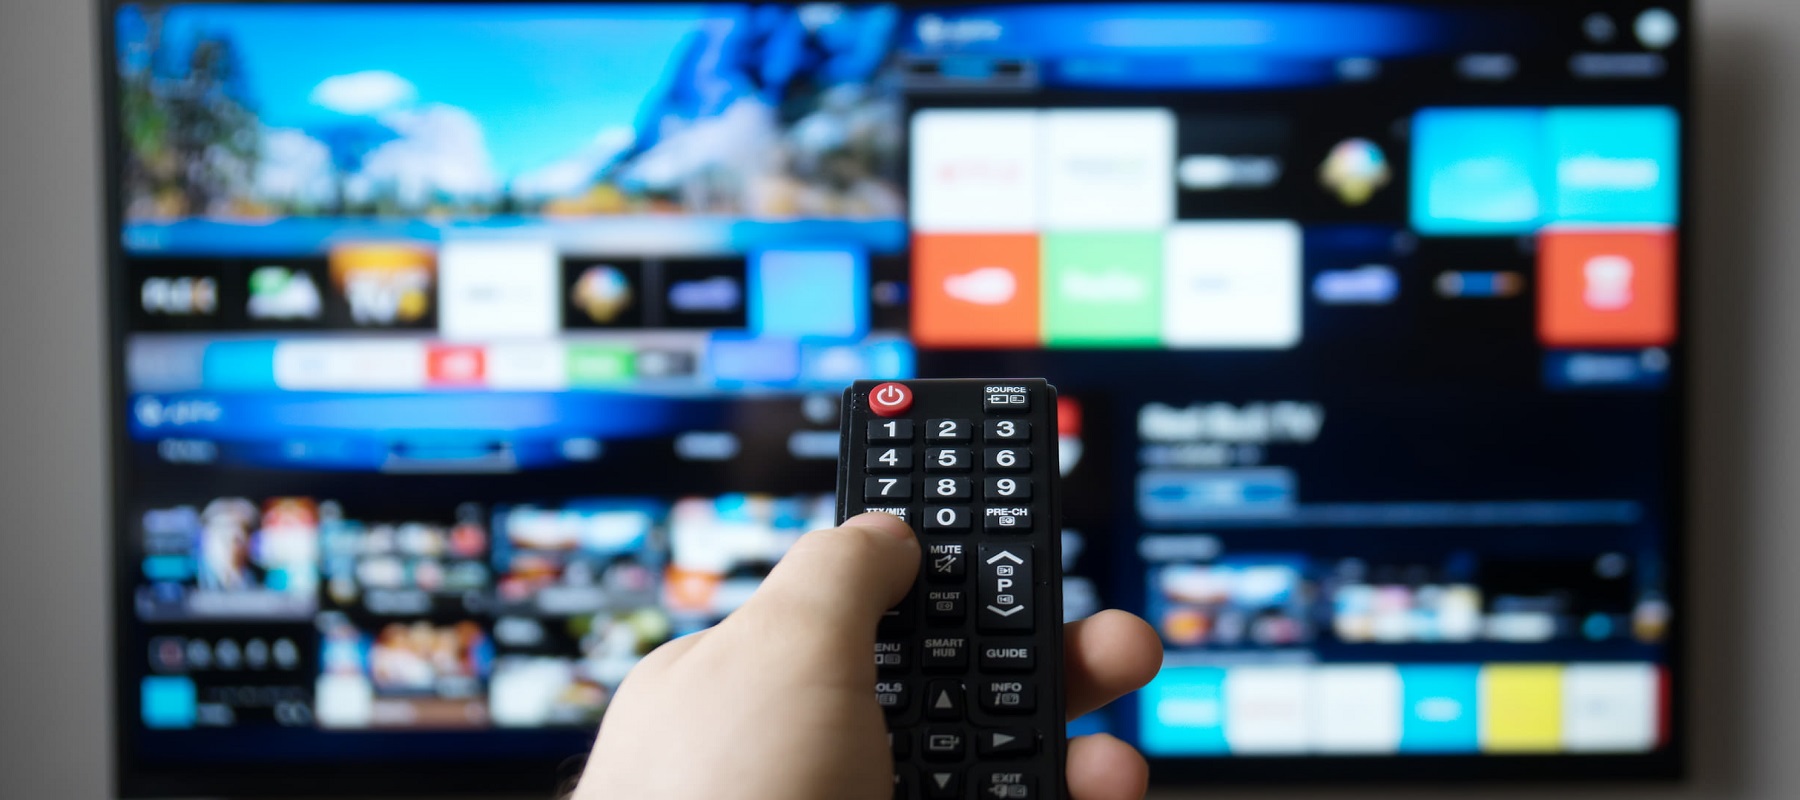 Global video on demand market to reach $387.5 billion by 2032, report